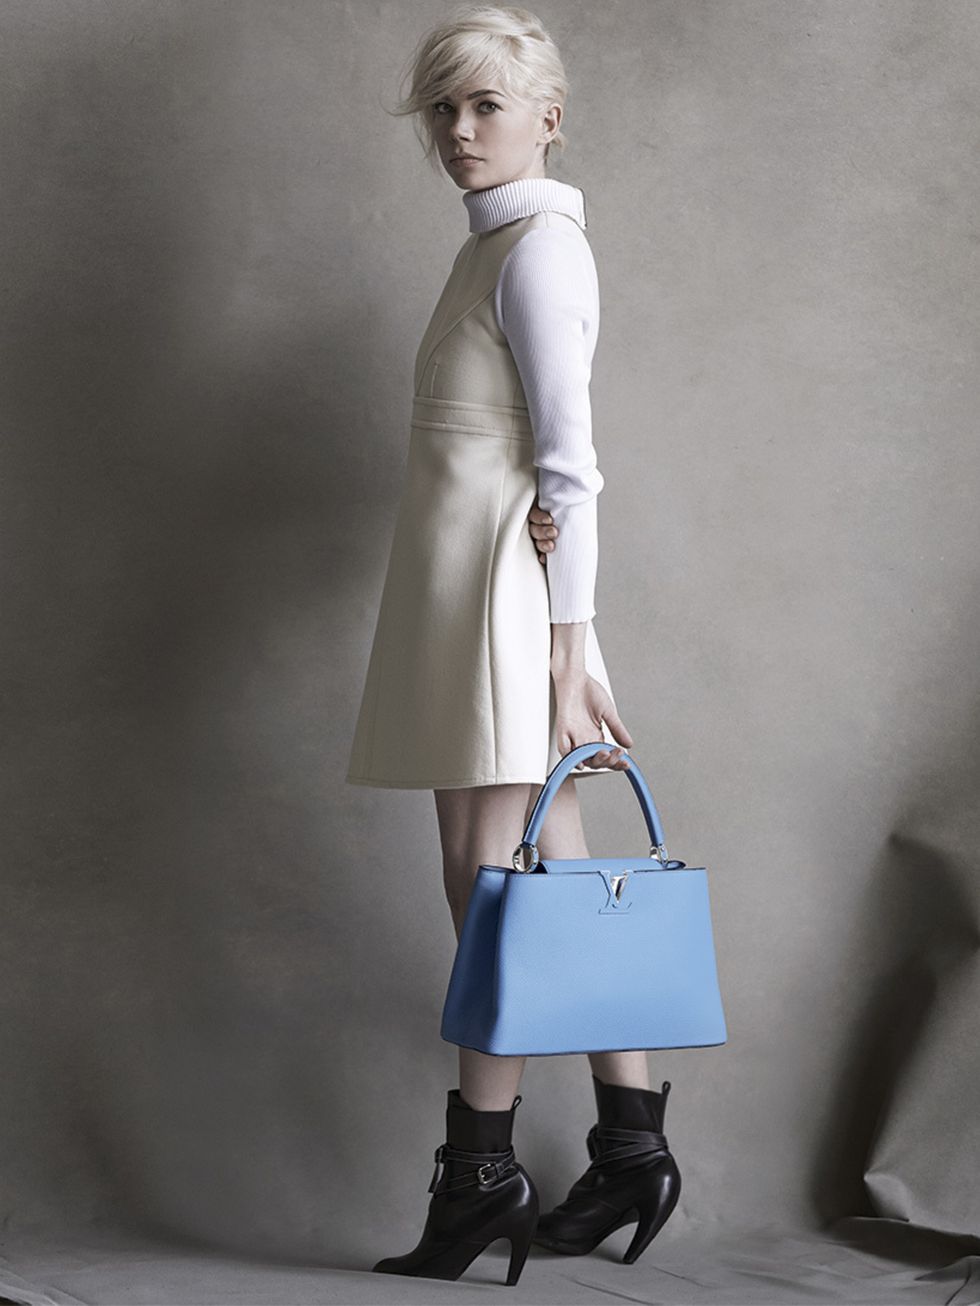 <p>Louis Vuitton a/w 2014 featuring Michelle Williams, photographed by Peter Lindbergh.</p>